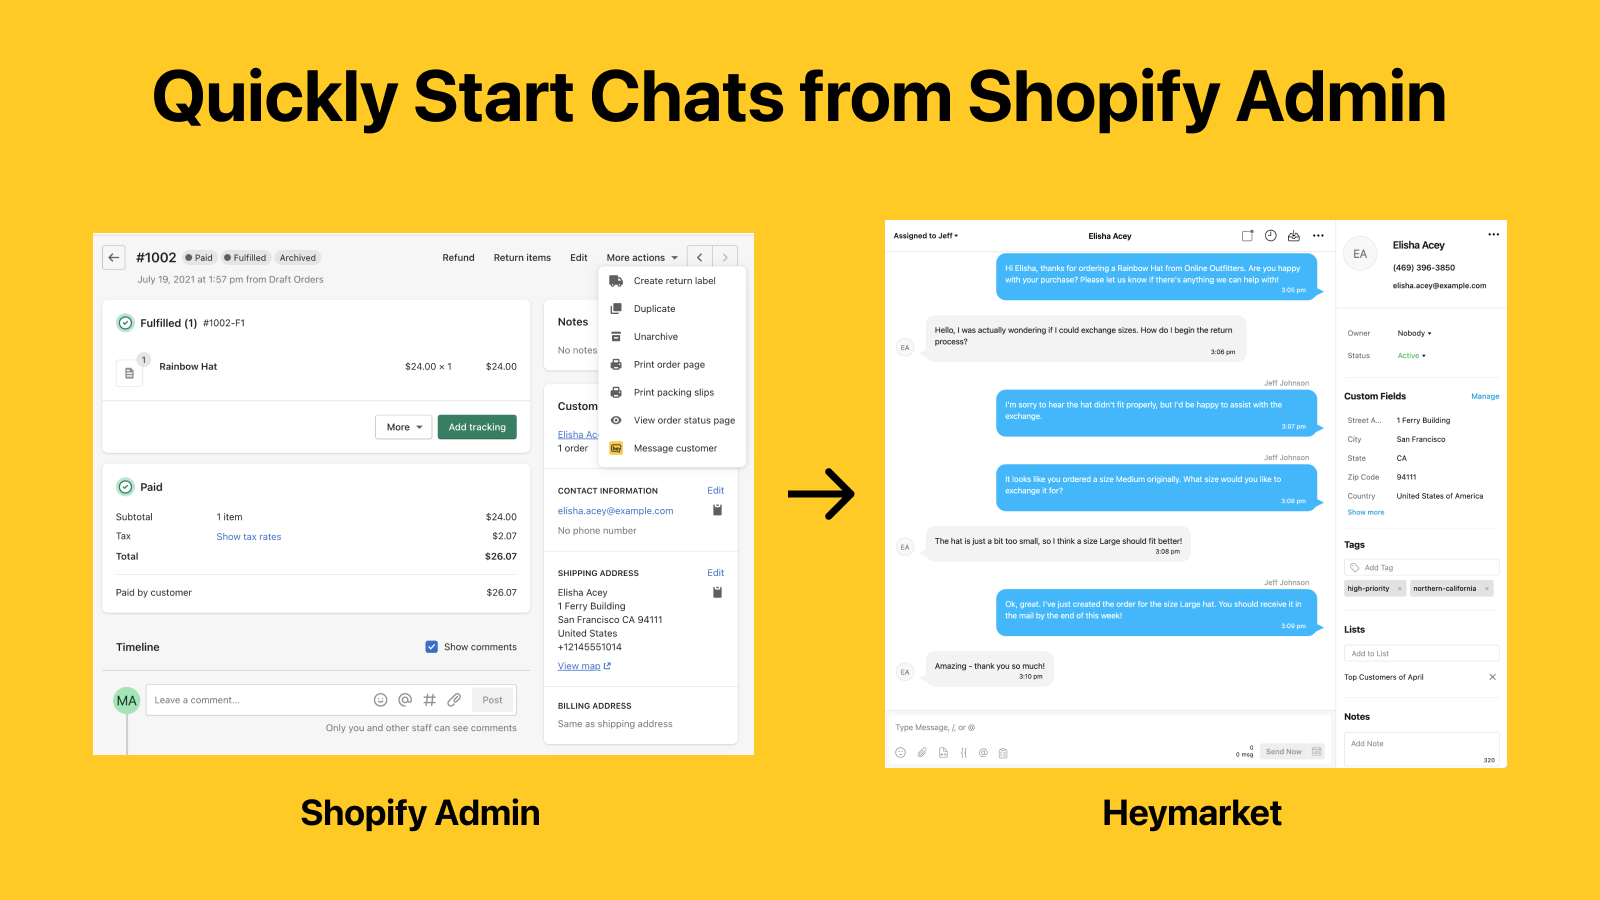 Quickly Start Chats from Shopify Admin